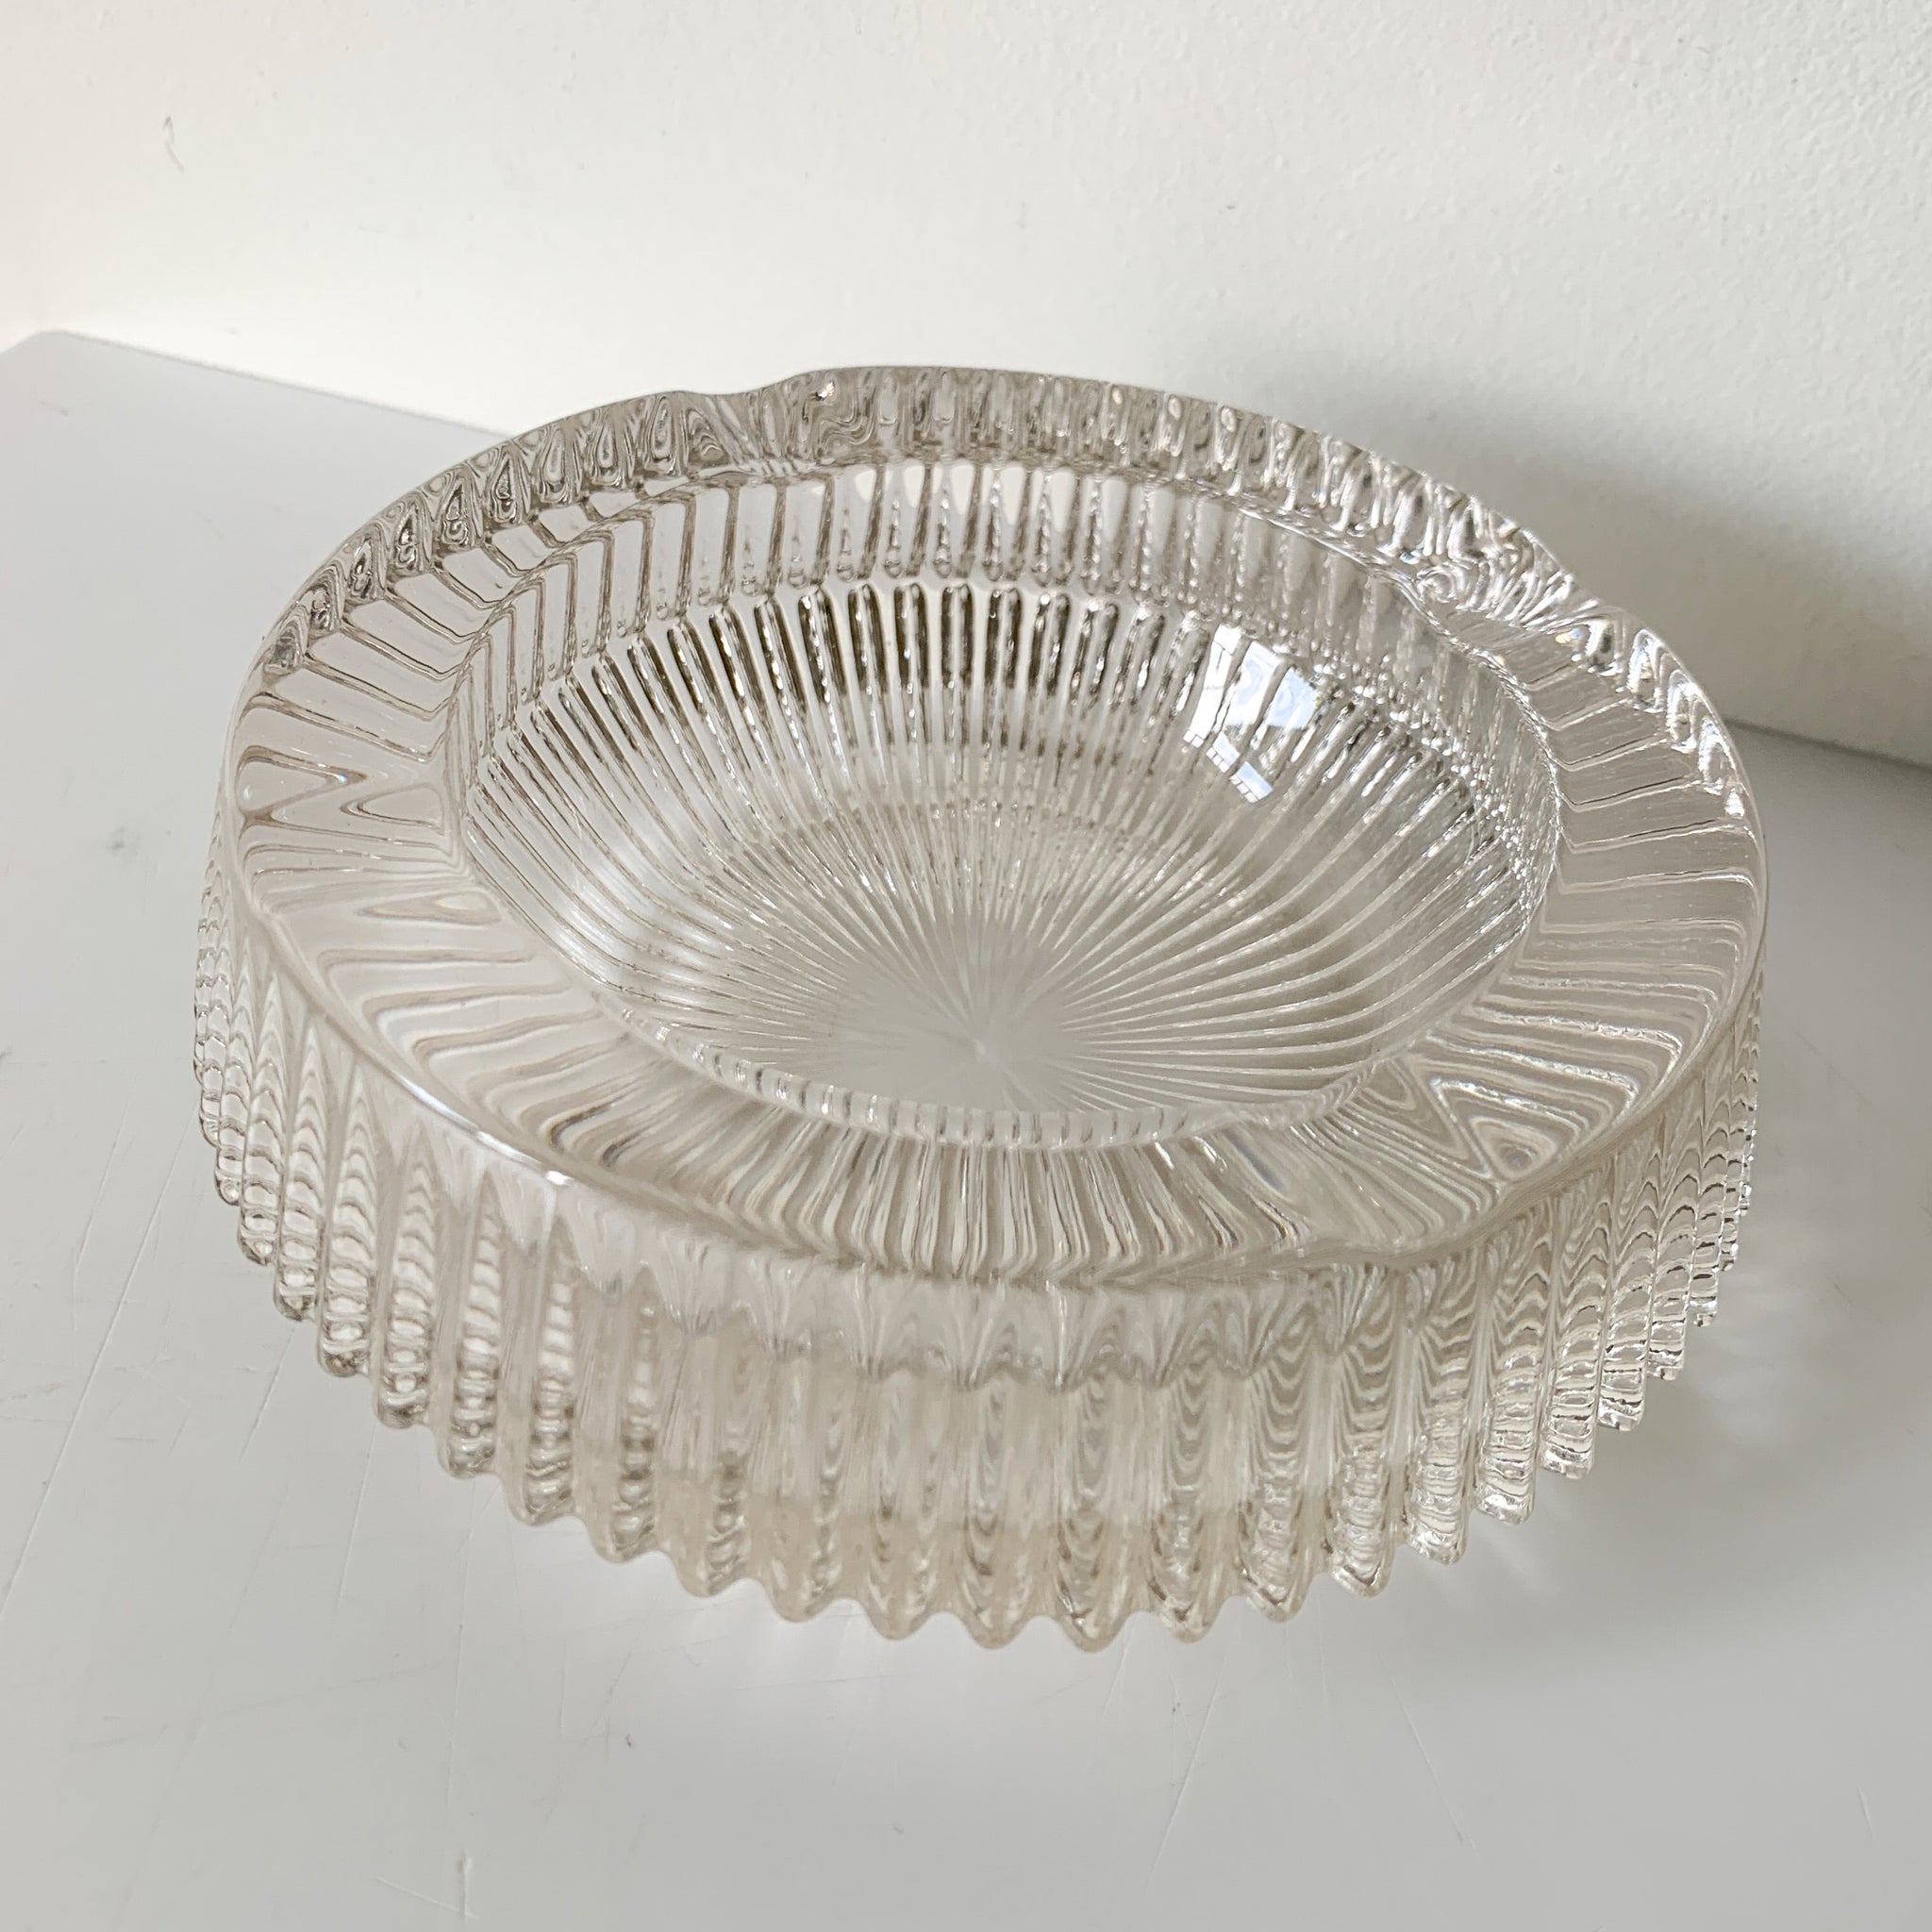 CLEAR GLASS ASHTRAY